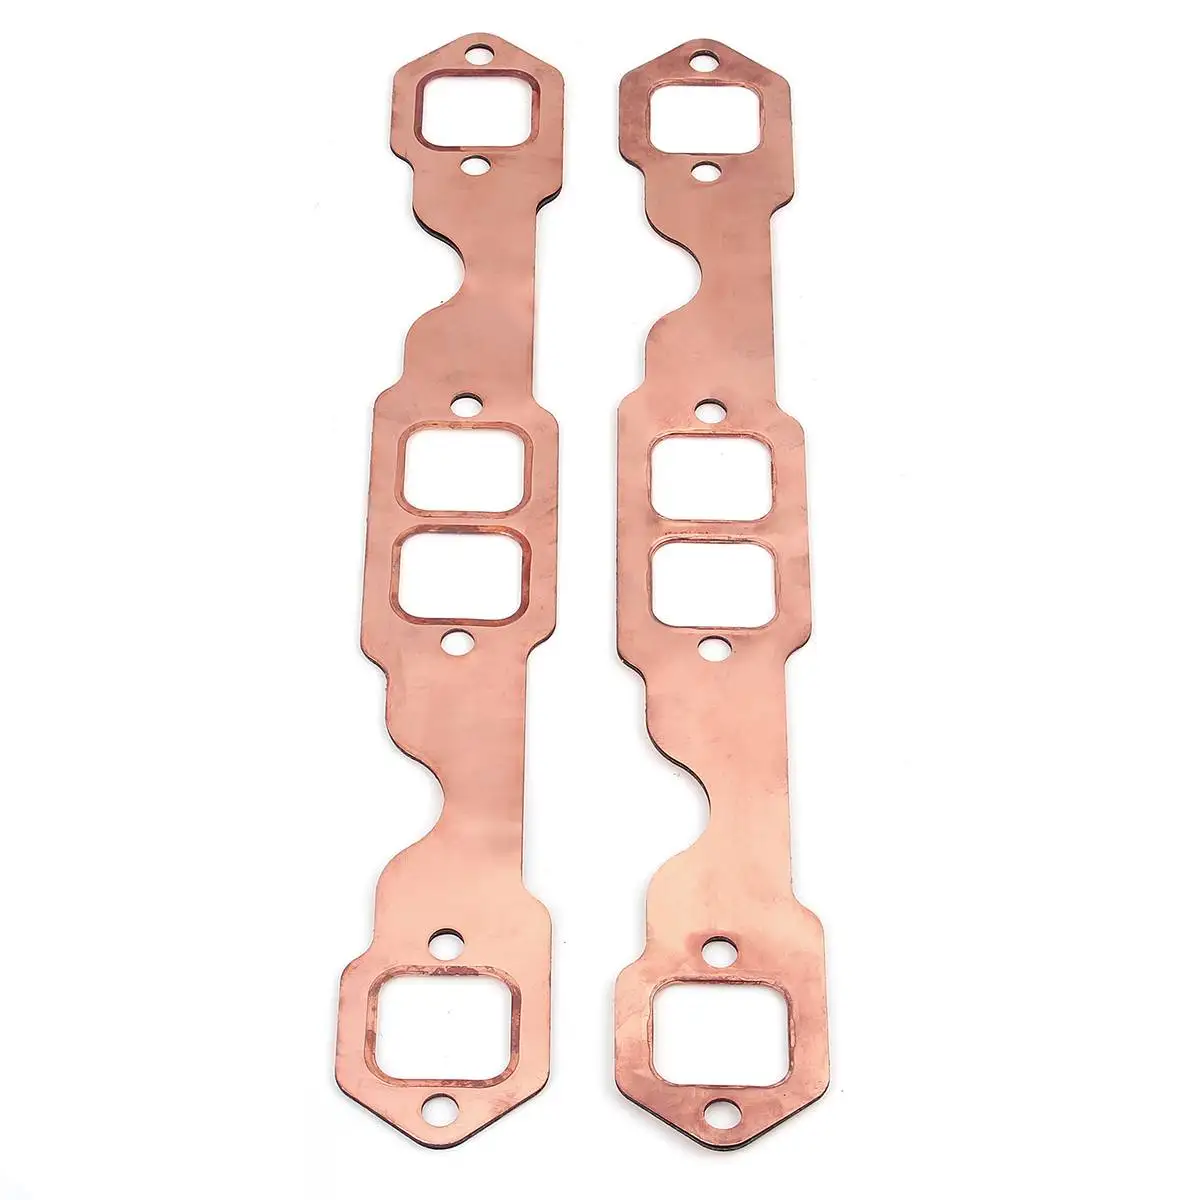 Hlyjoon Exhaust Flange 2Pcs Copper Plating Exhaust Header Gasket with Square Port Reusable Fit for SB 283 327 350 383 400 Engine 